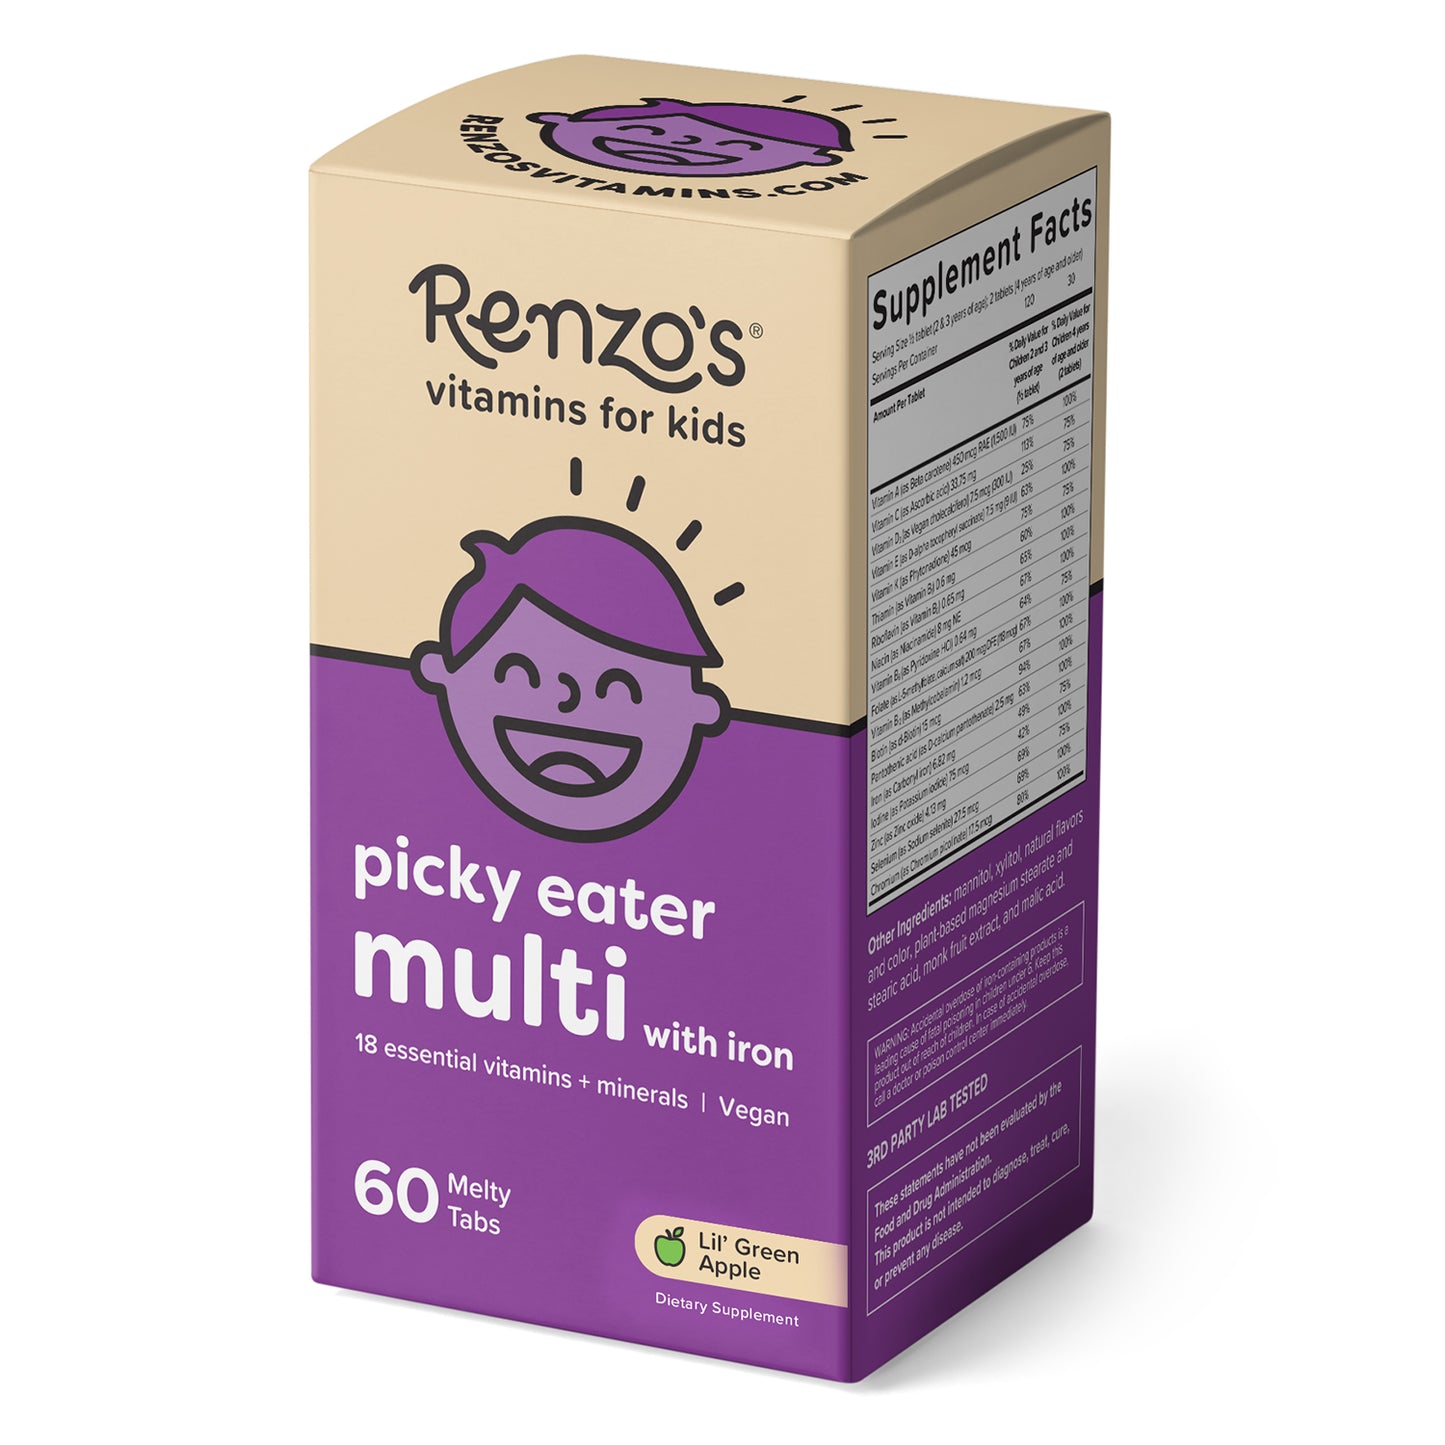 Renzo's Vitamins apple-flavored childrens multivitamin for picky eaters box upright on a white surface